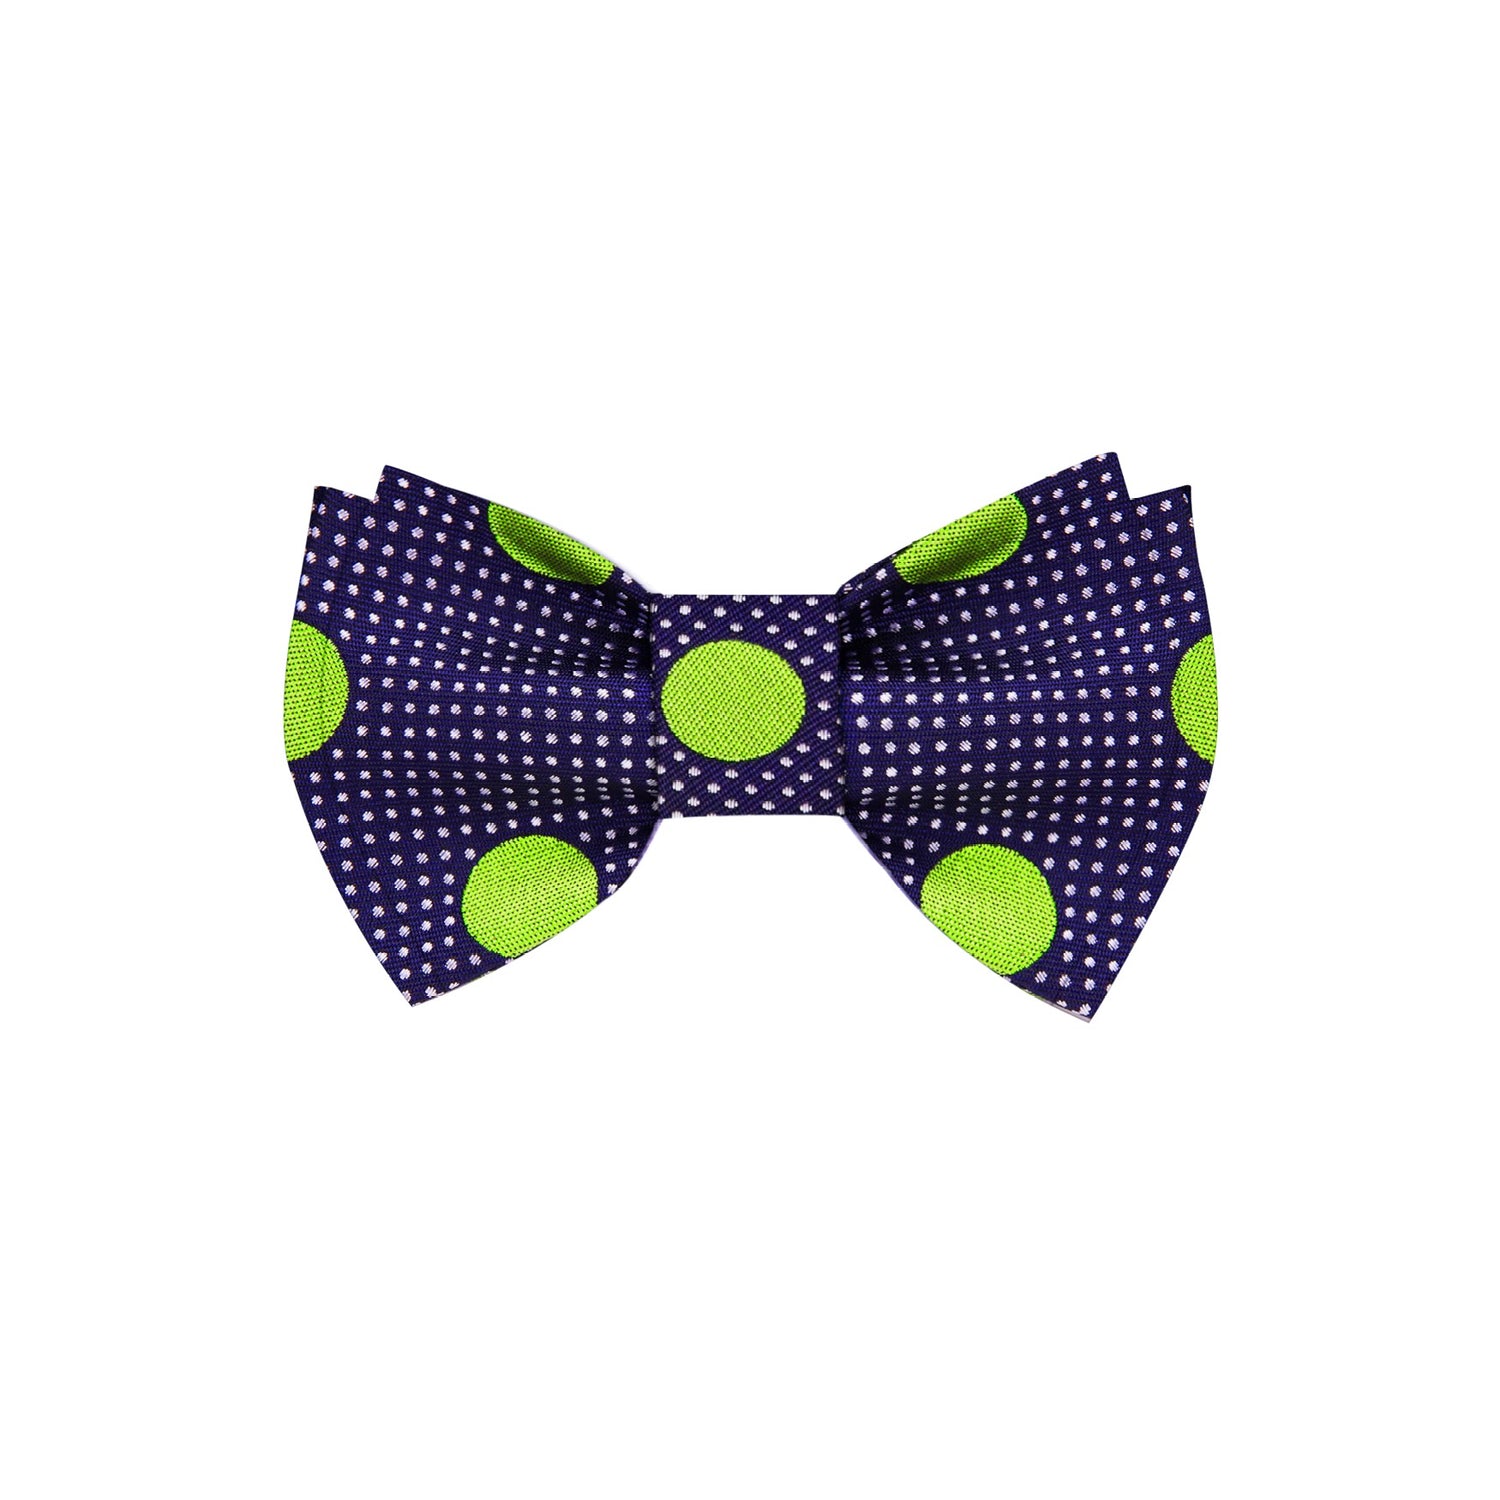 Blue with Green Dots Bow Tie